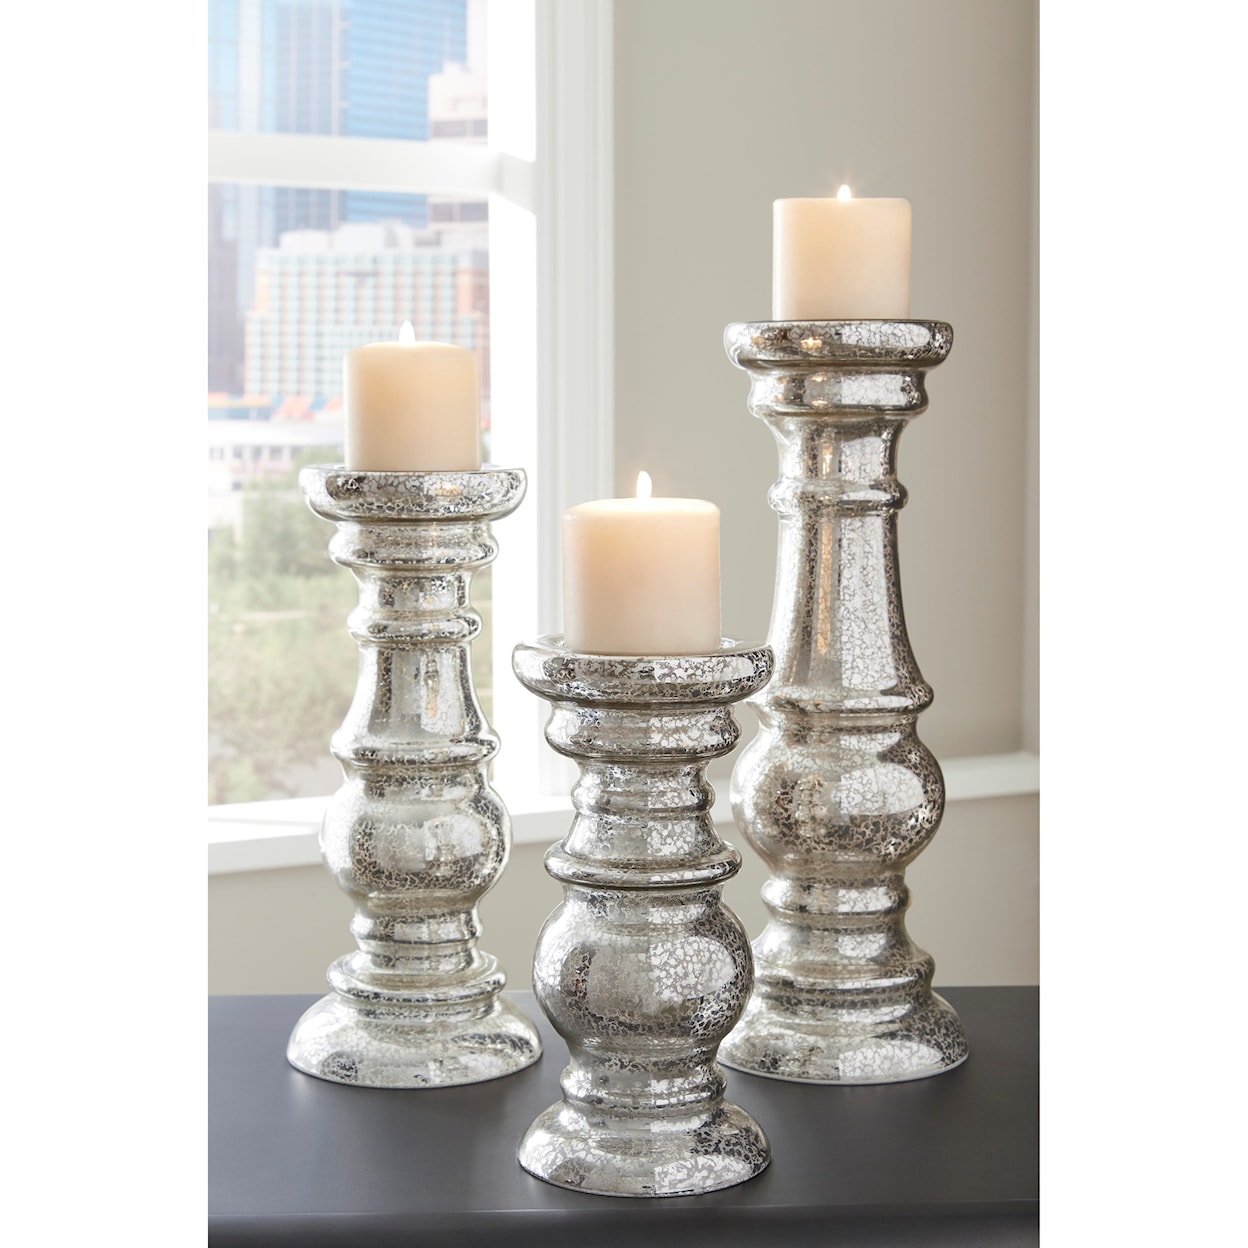 Michael Alan Select Accents Rosario Silver Finish Candle Holder Set